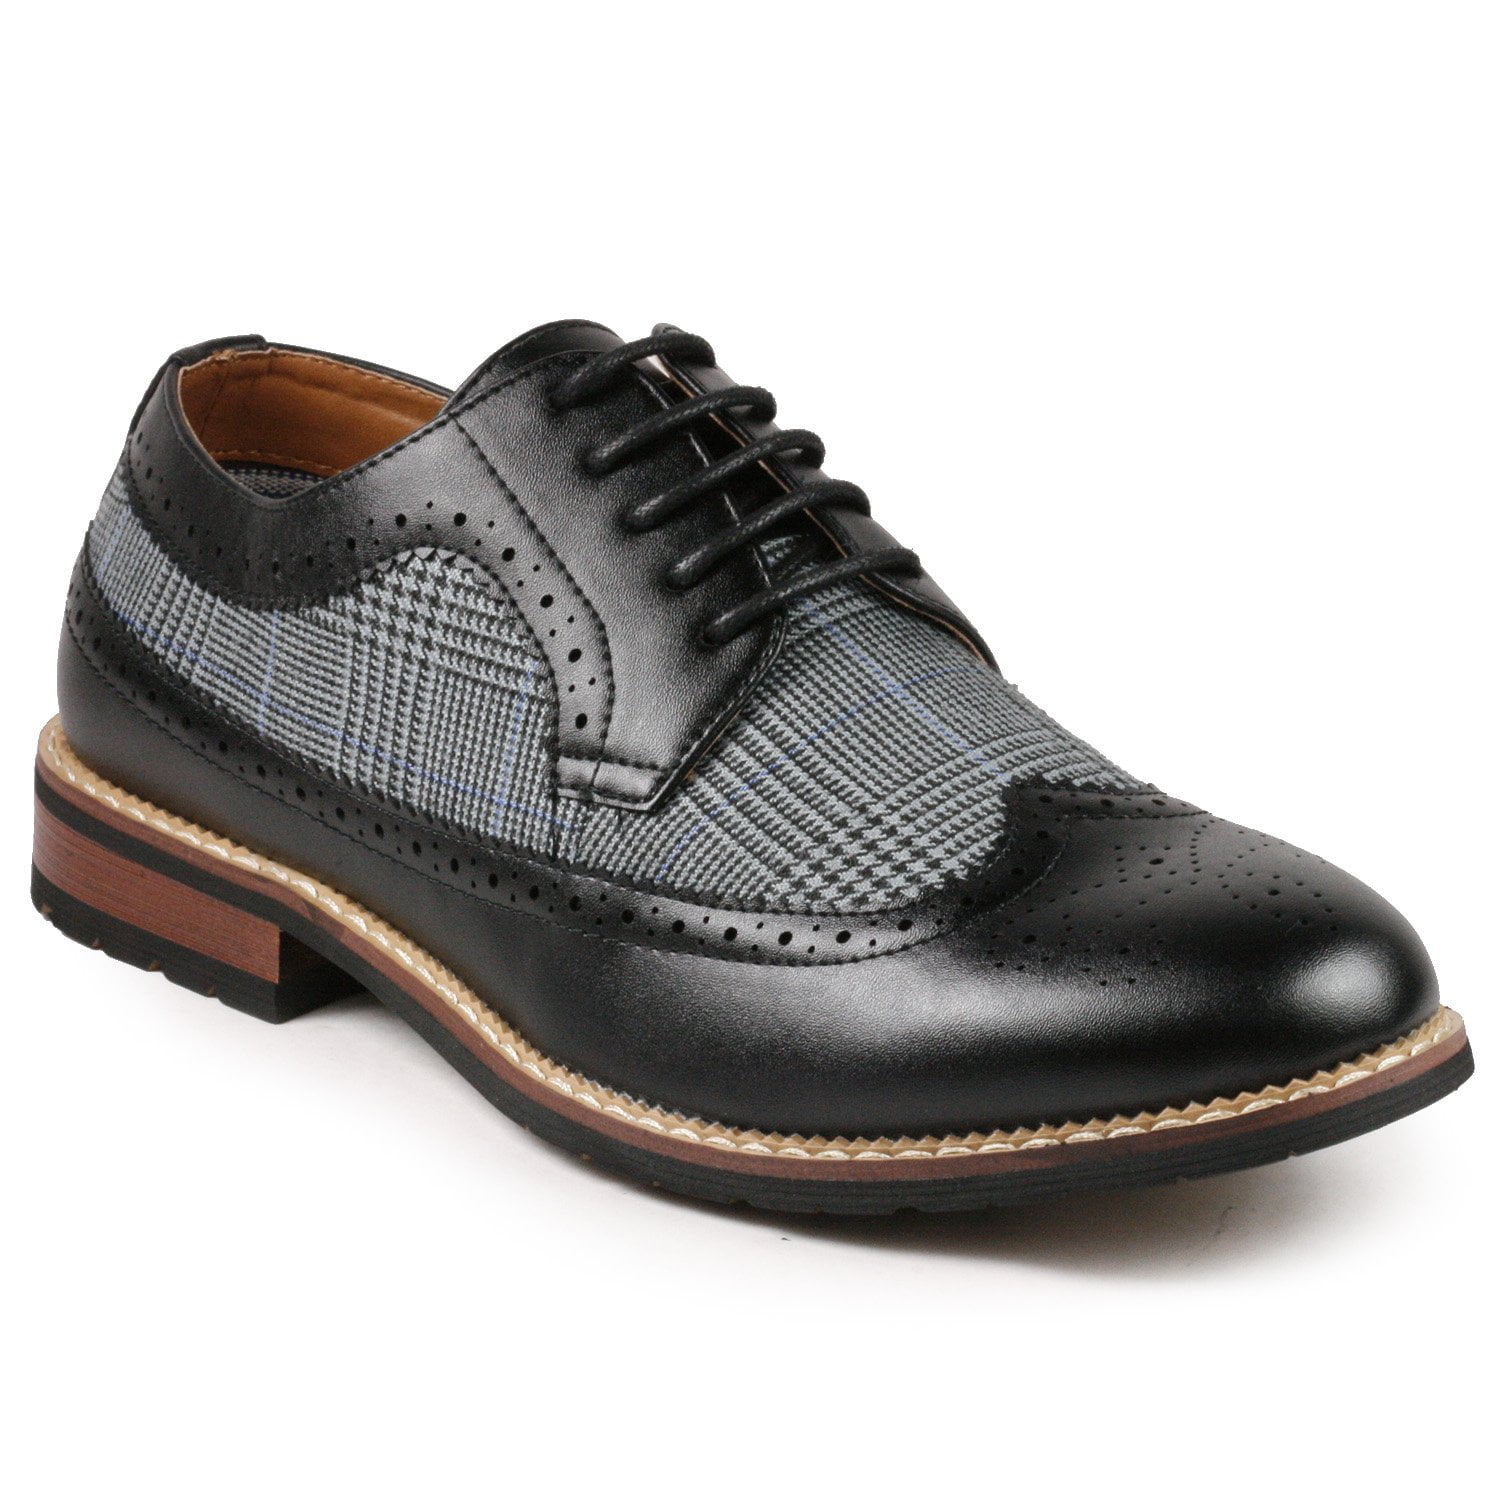 Metrocharm MC316 Men's Tweed Perforated Wing Tip Lace Up Dress Oxford ...